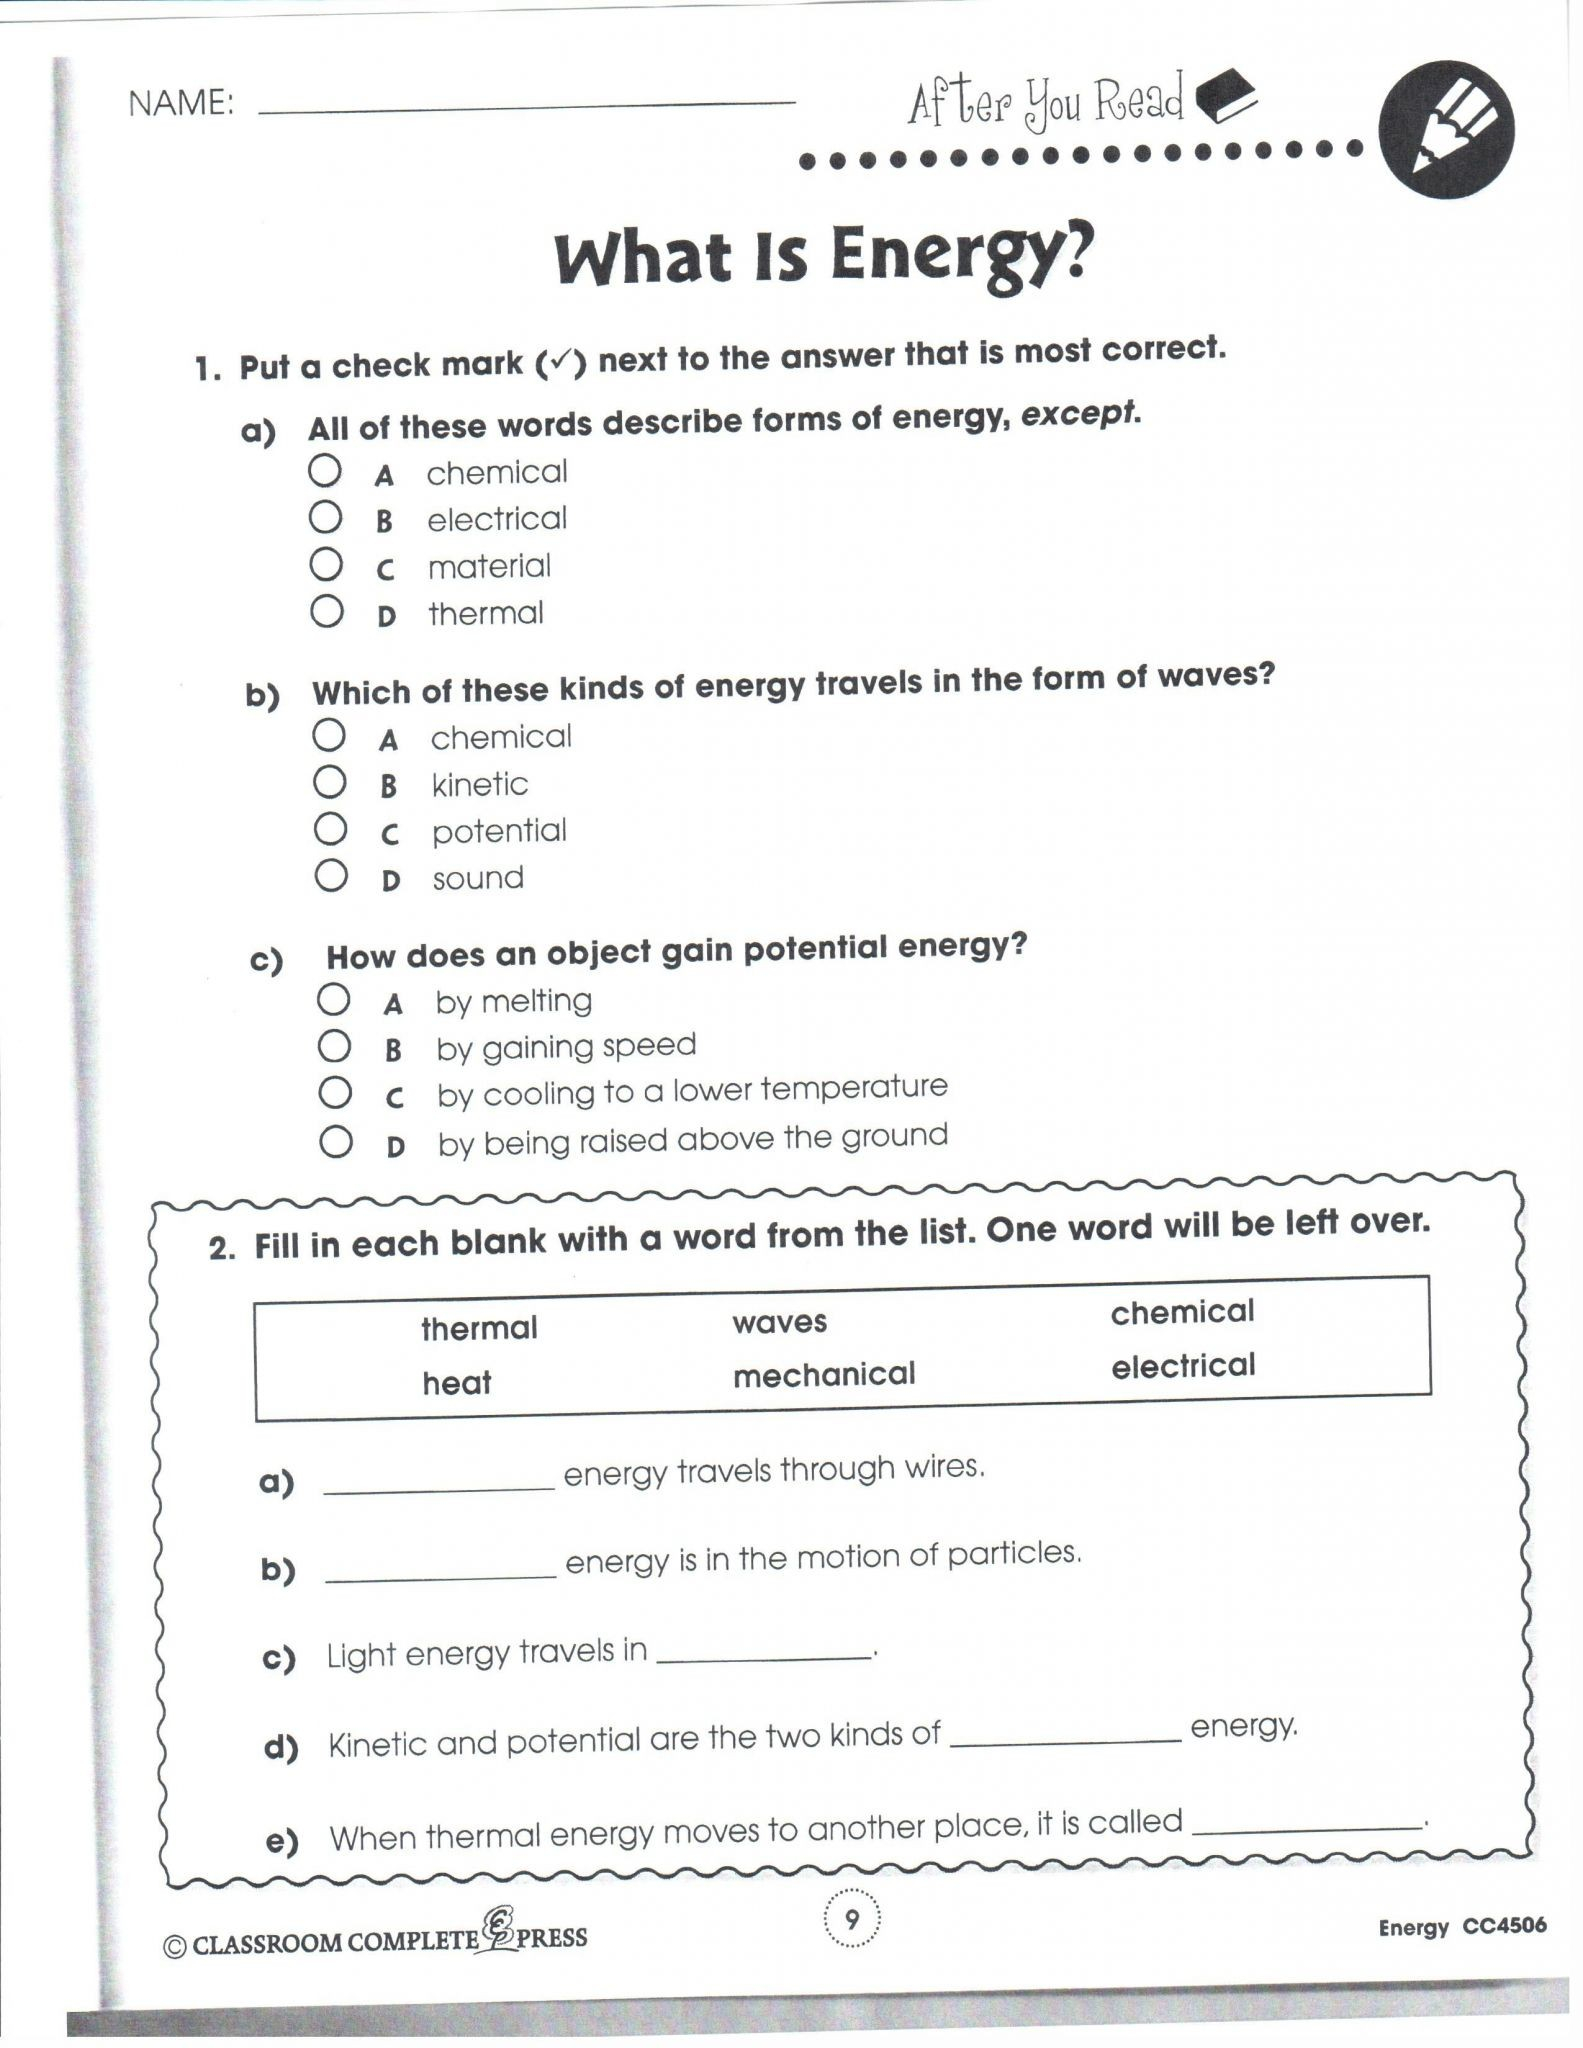 Periodic Table Extra Practice Worksheet New Parcc Practice As Well As Parcc Practice Worksheets